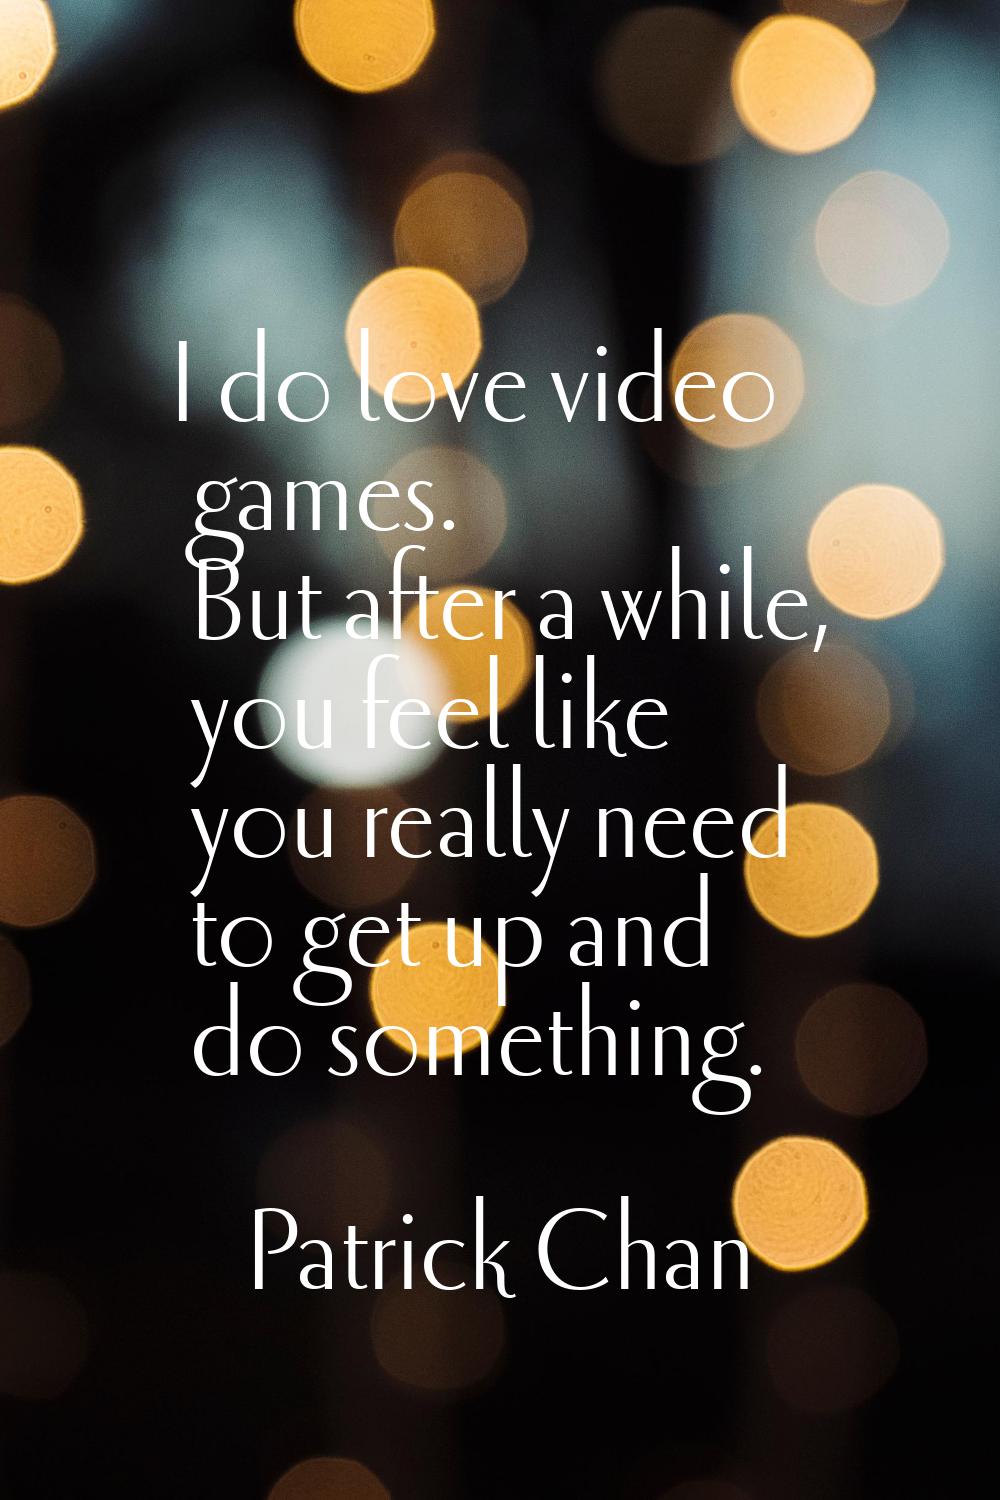 I do love video games. But after a while, you feel like you really need to get up and do something.